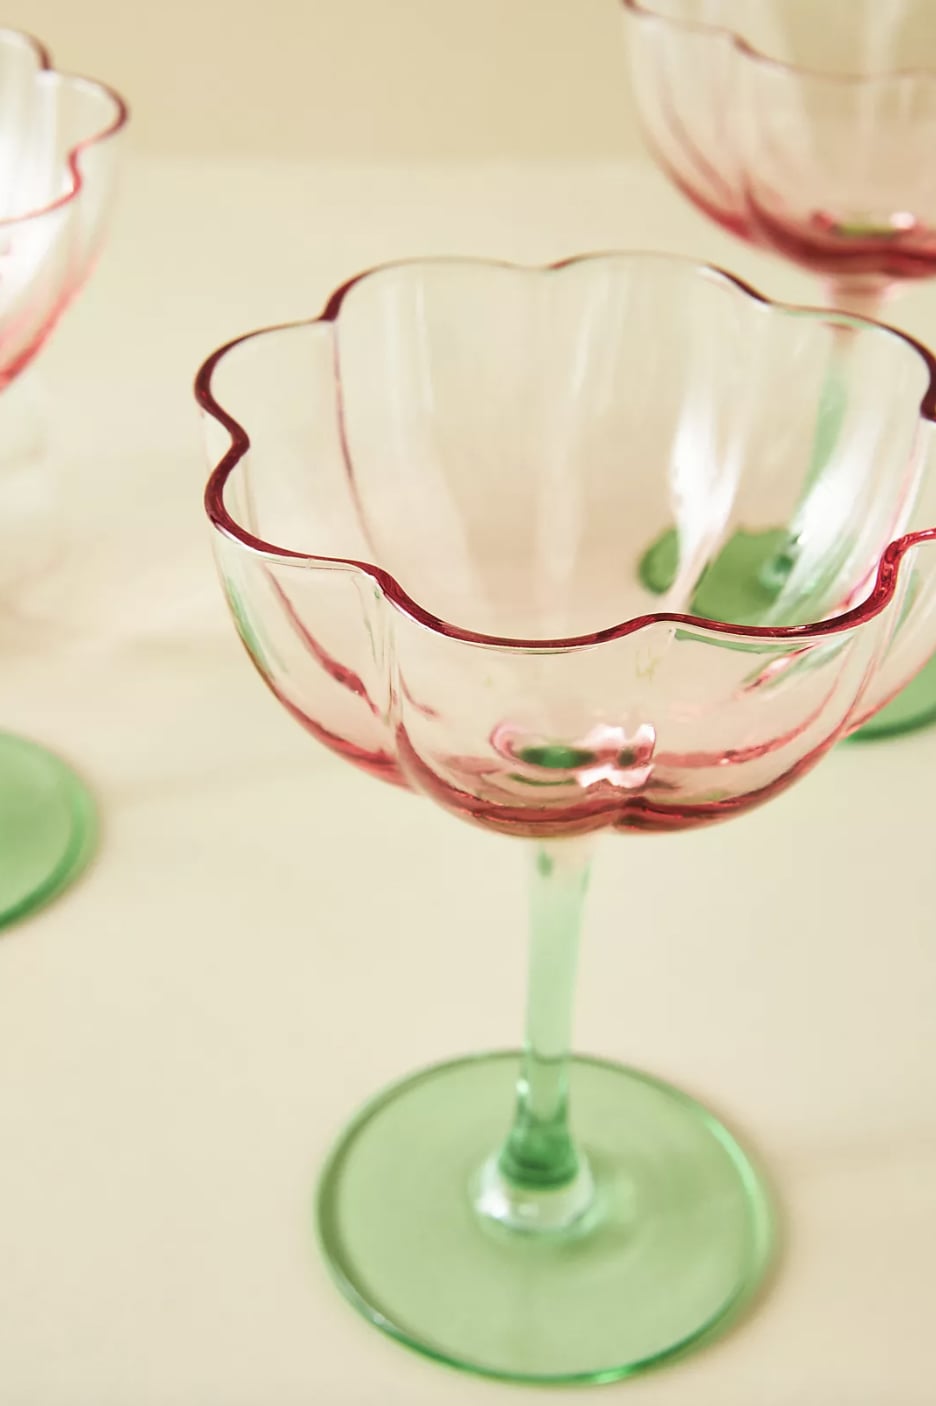 Such Pretty Things: Target Tuesday: Pretty Pink Glasses